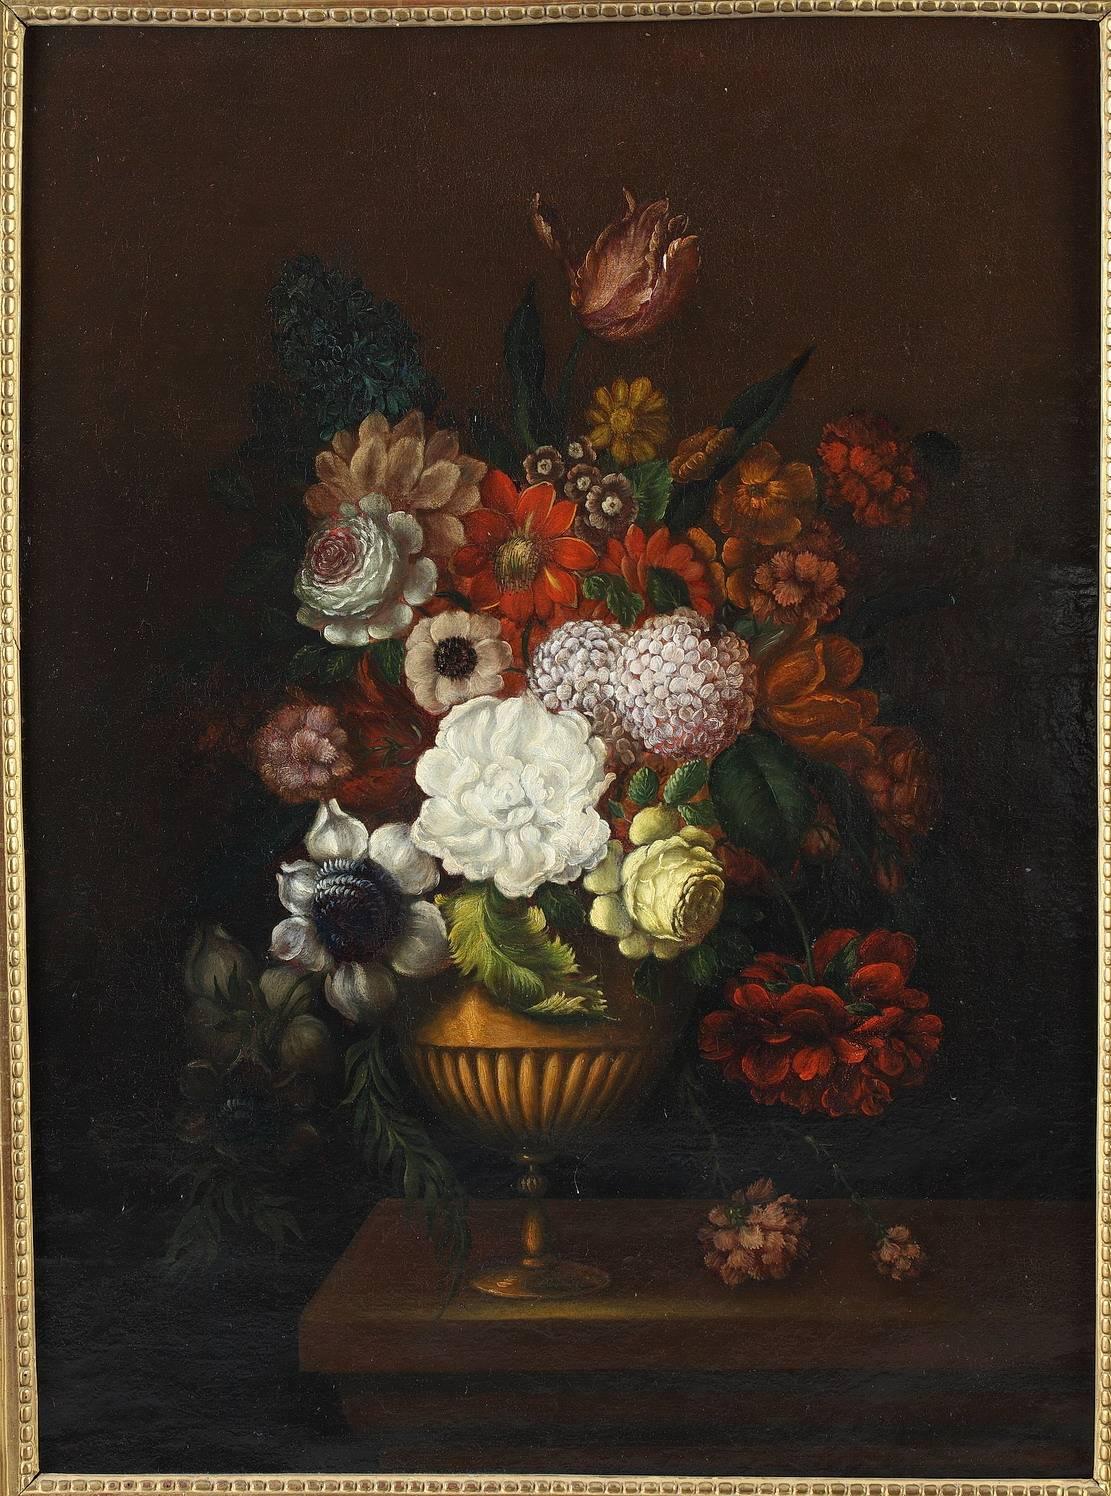 Napoleon III 19th Century Paintings Flower Bouquets in the Dutch School Style